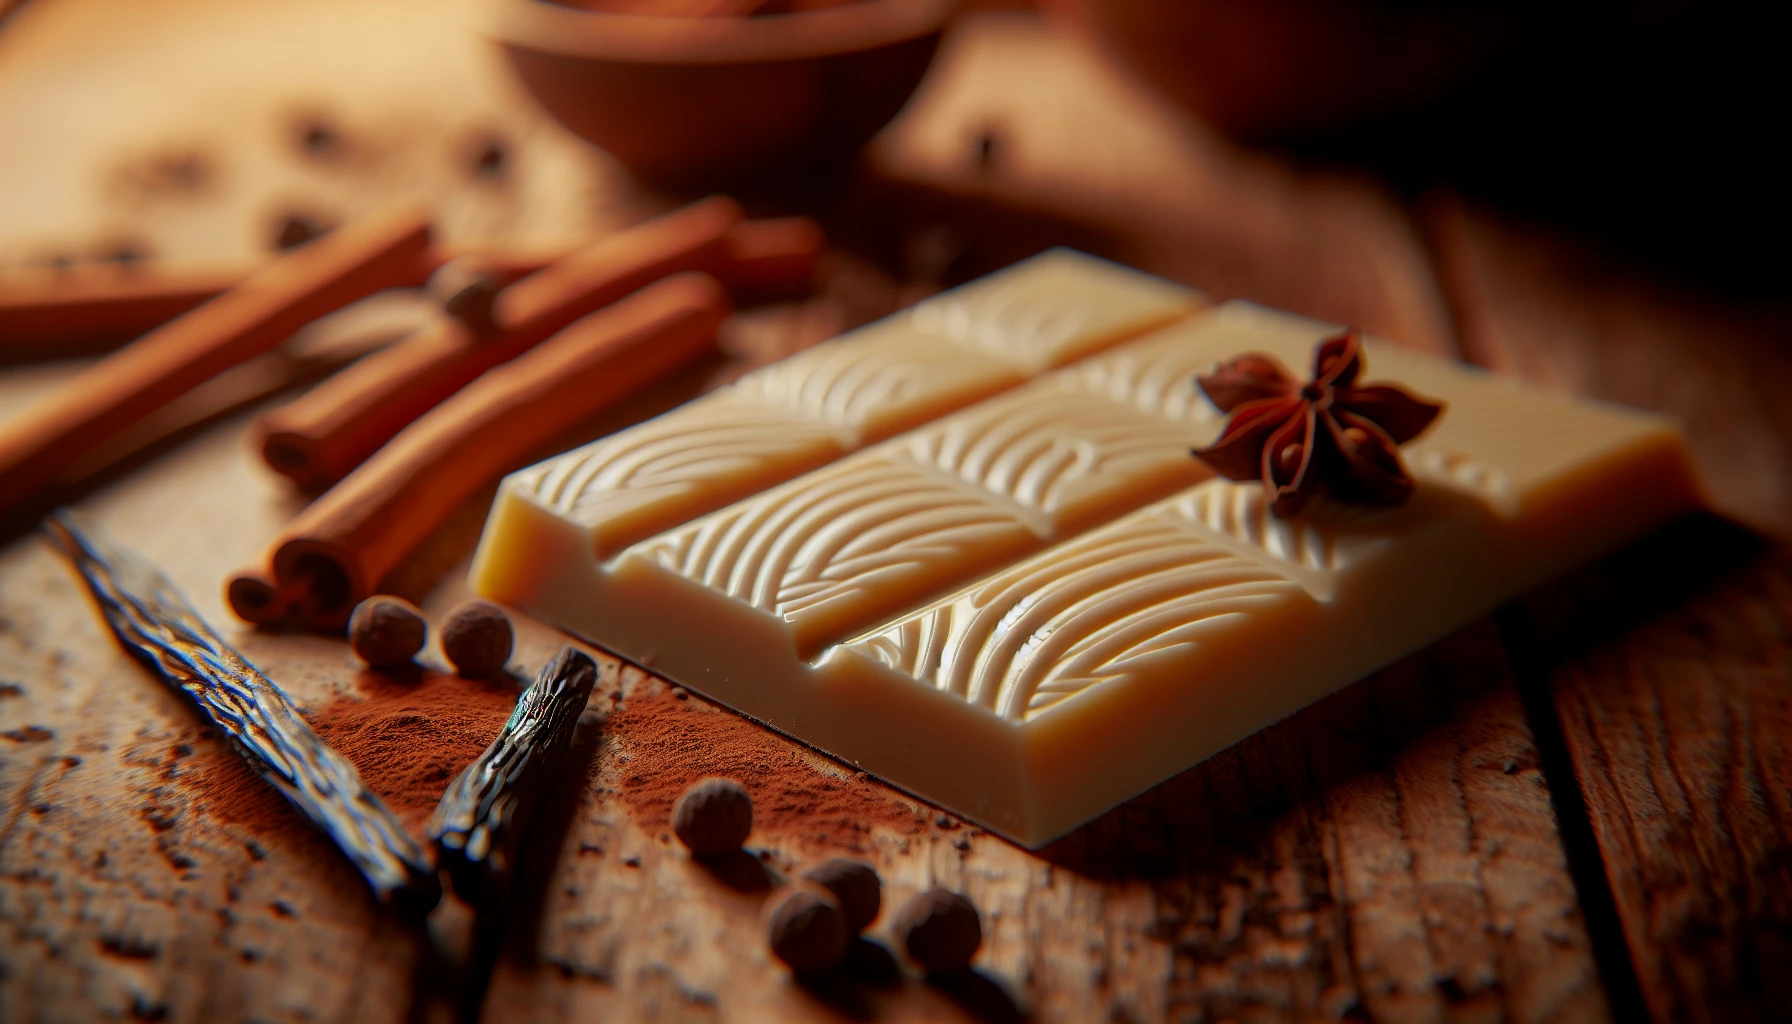 A captivating photo of a spiced white chocolate bar with cinnamon and vanilla accents